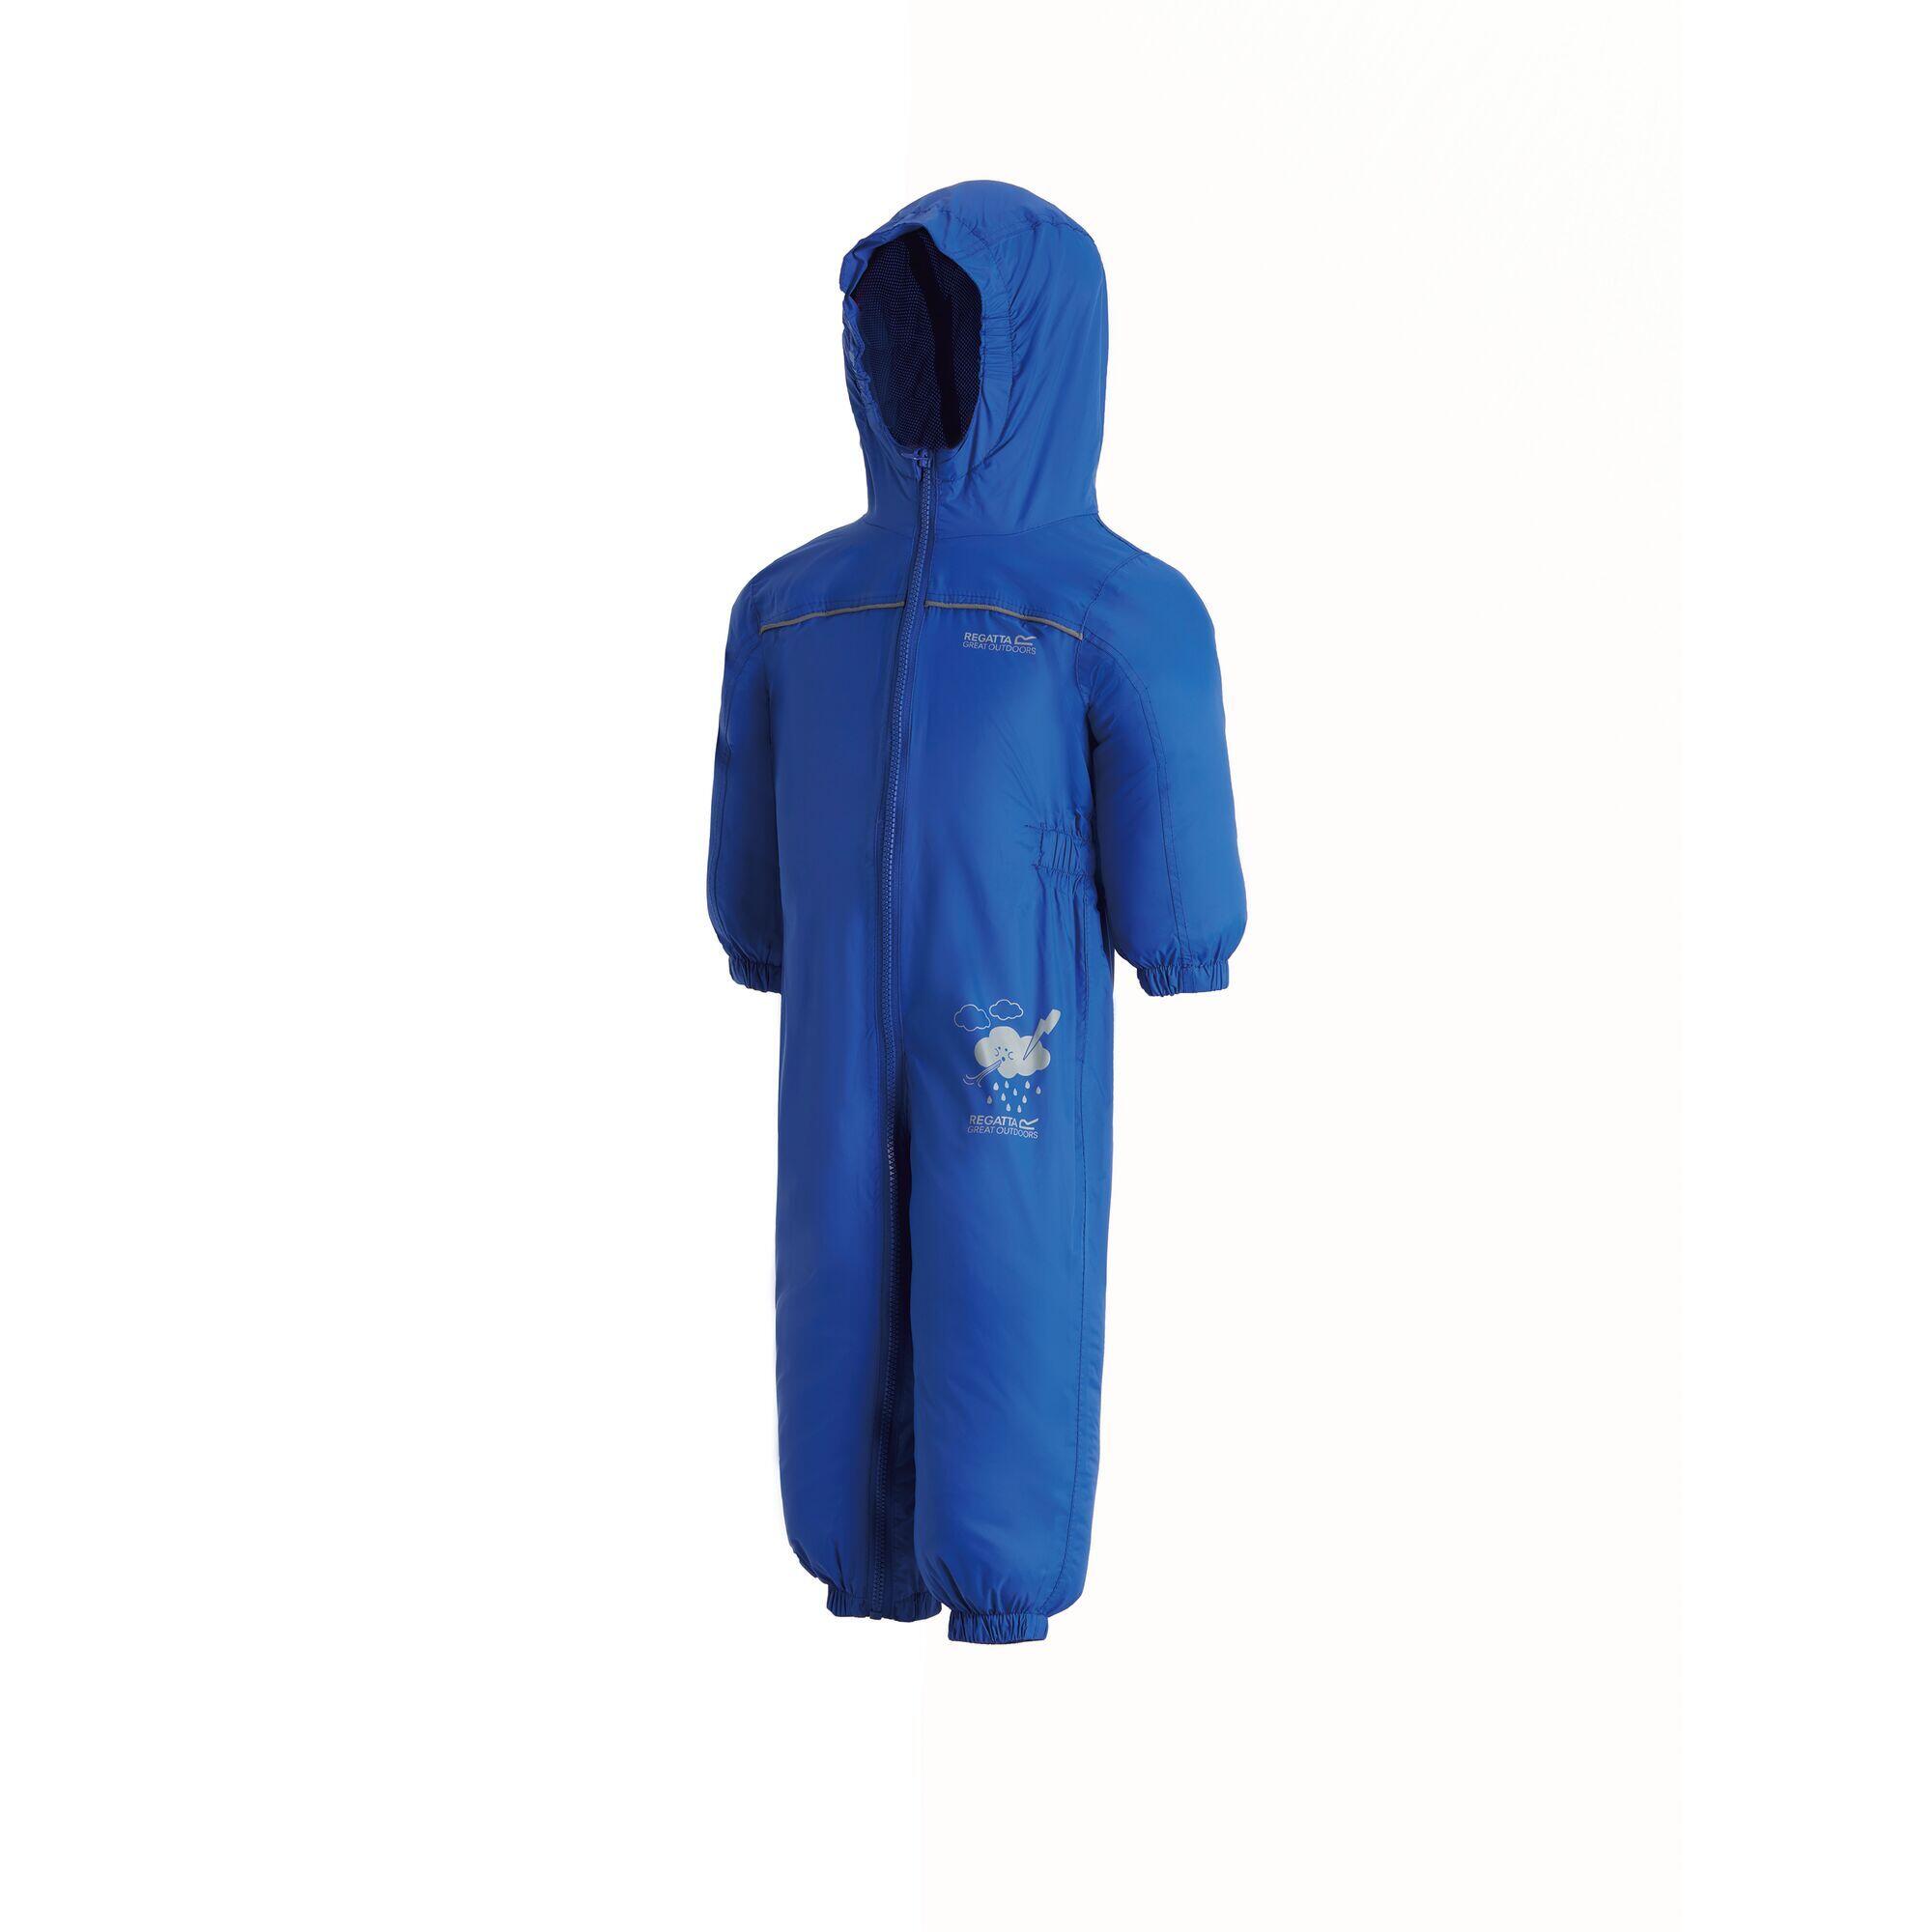 Great Outdoors Childrens Toddlers Puddle IV Waterproof Rainsuit (Oxford Blue) 4/5